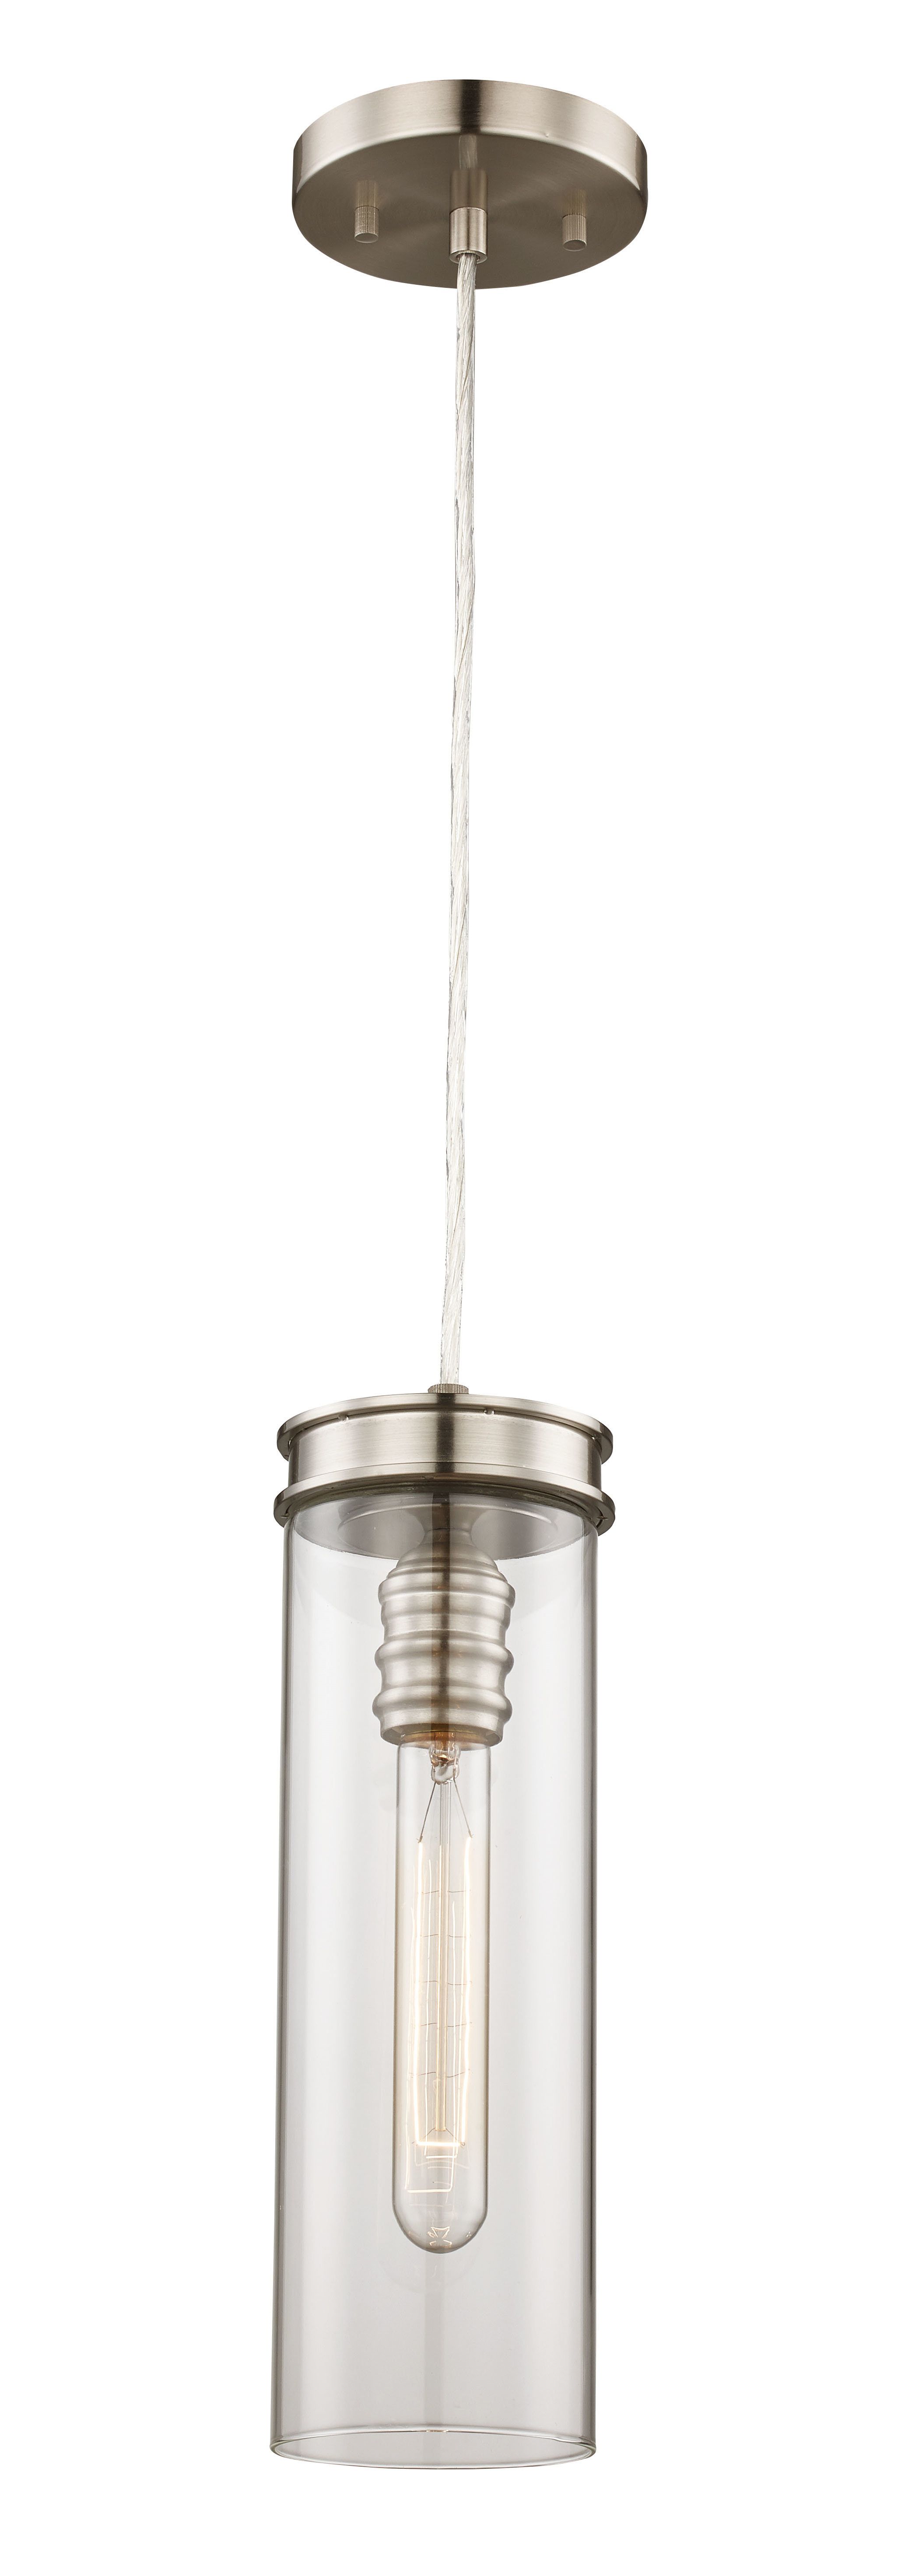 Well Known Oldbury 1 Light Single Cylinder Pendants With Regard To Pardee 1 Light Cylinder Pendant (View 9 of 20)